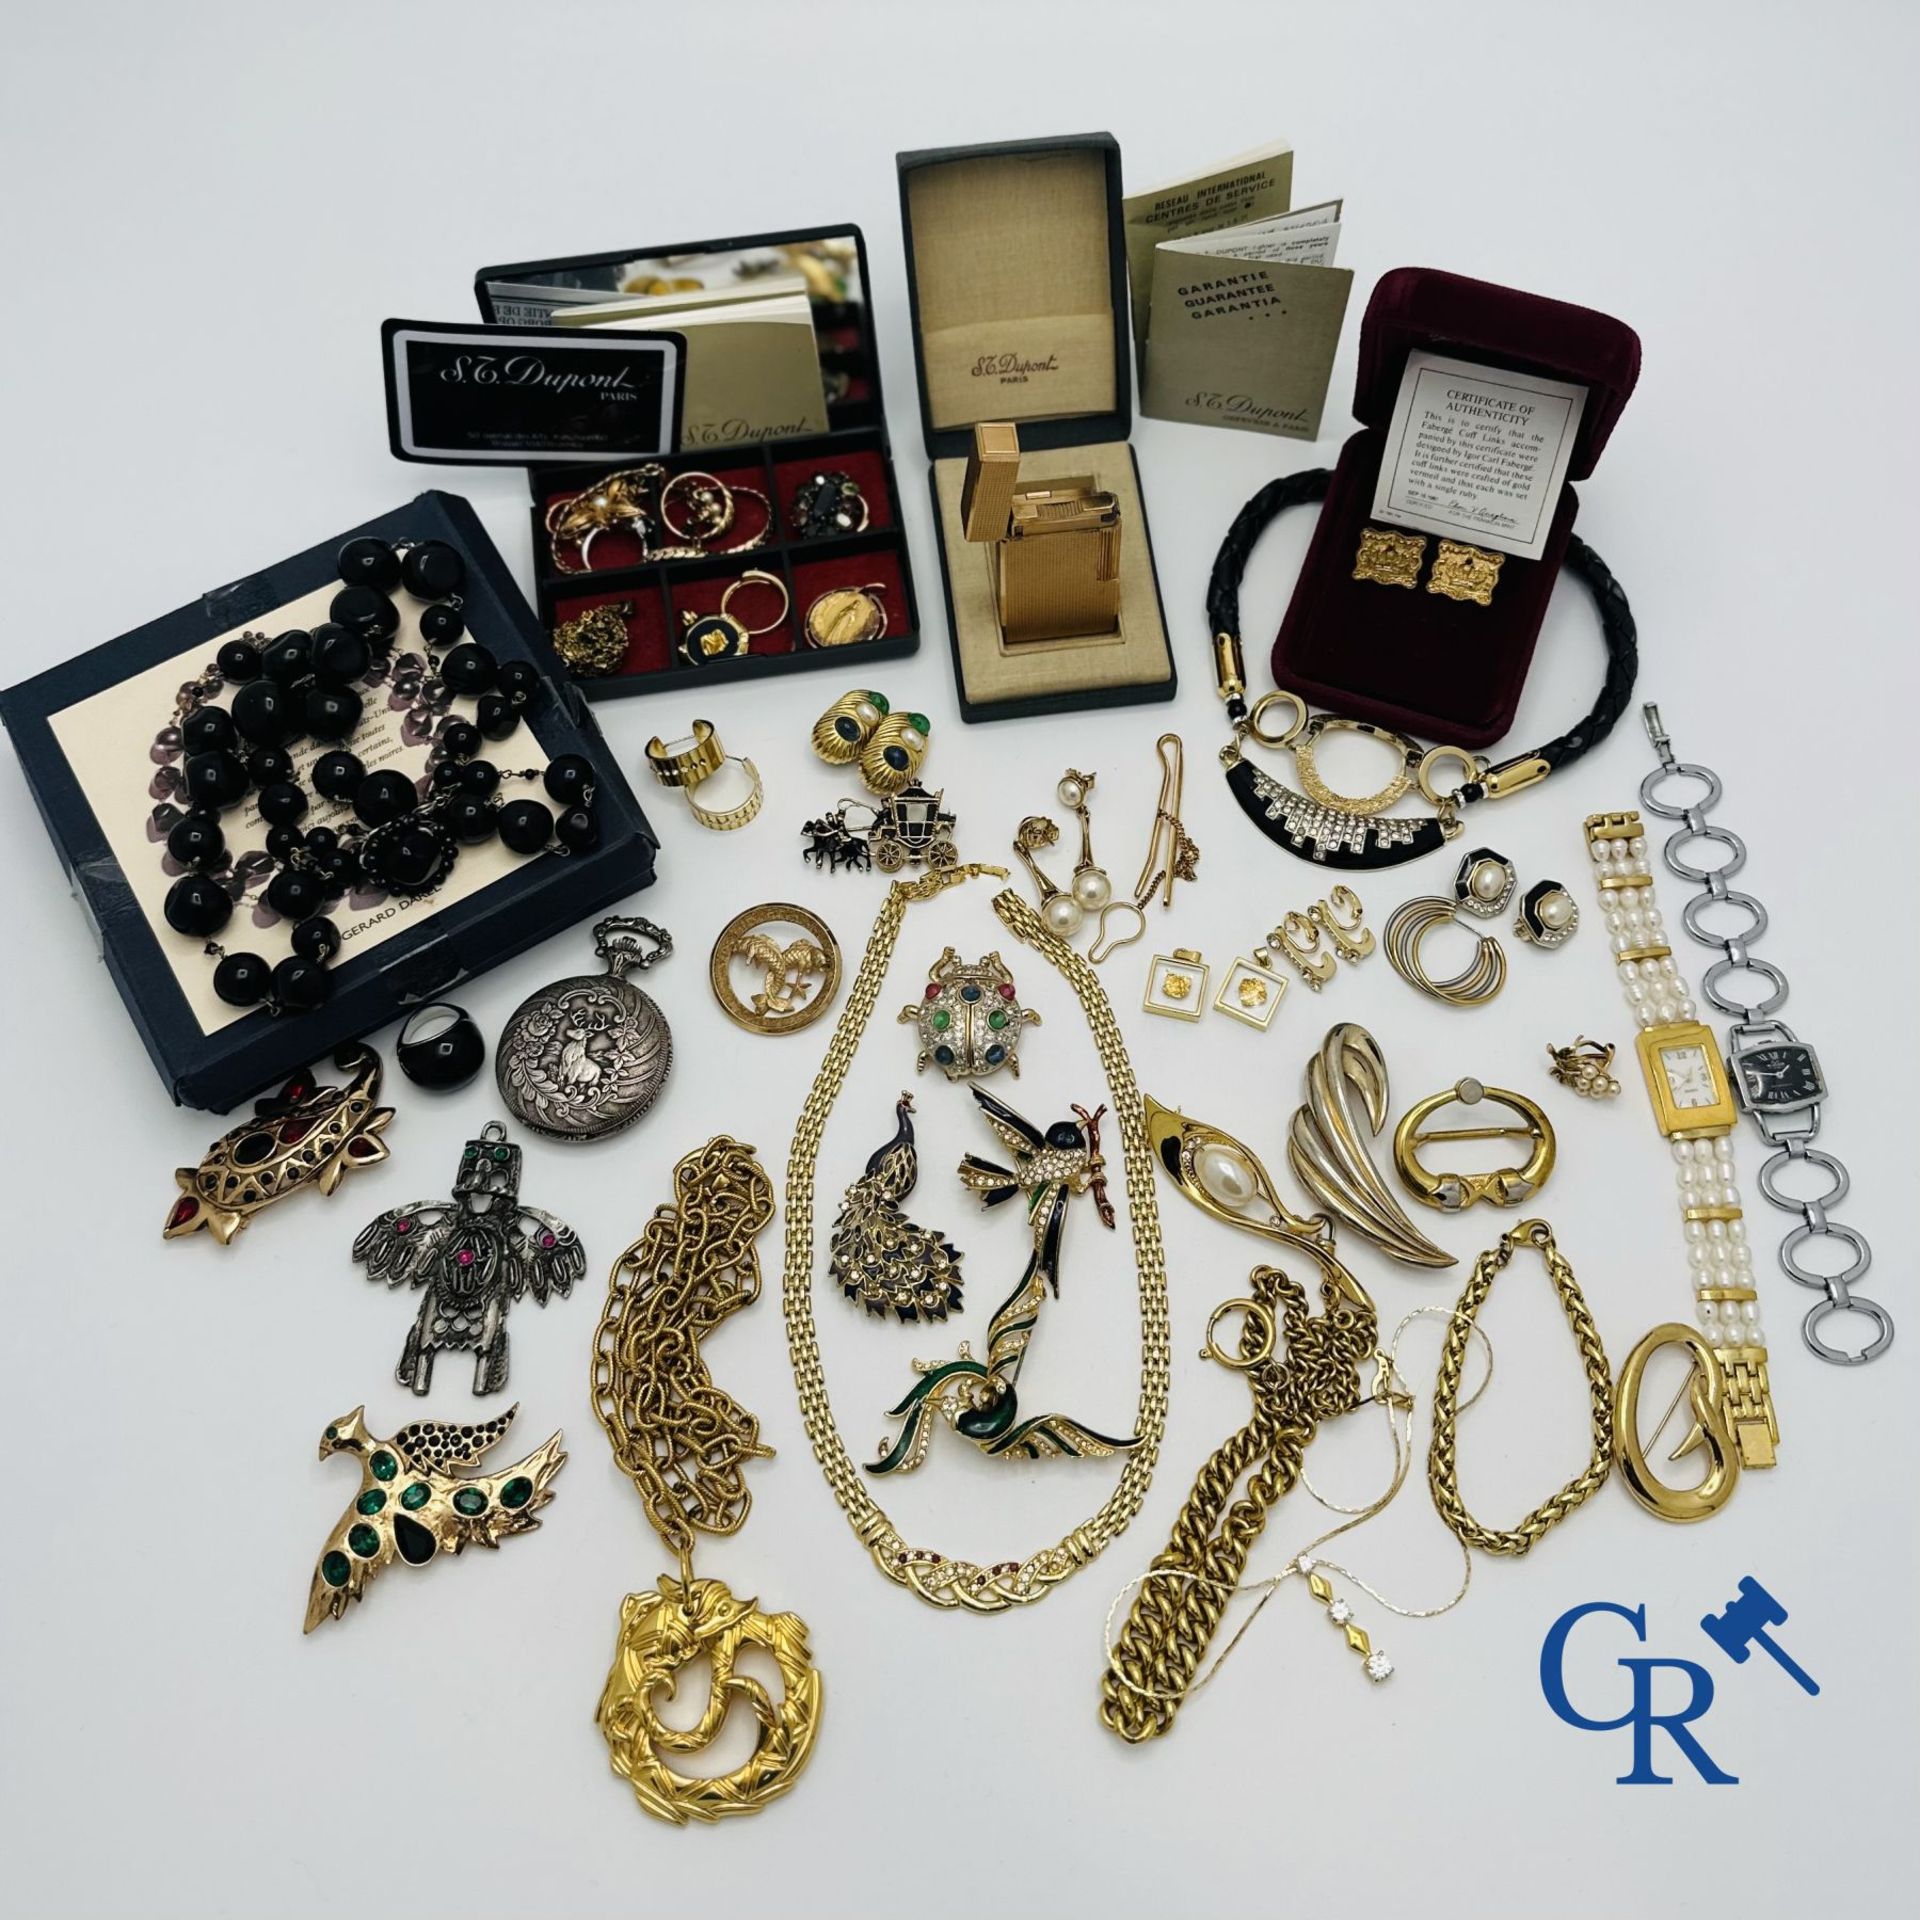 Large lot of fantasy jewellery, pocket watch, a Dupont lighter and cufflinks. - Image 2 of 5